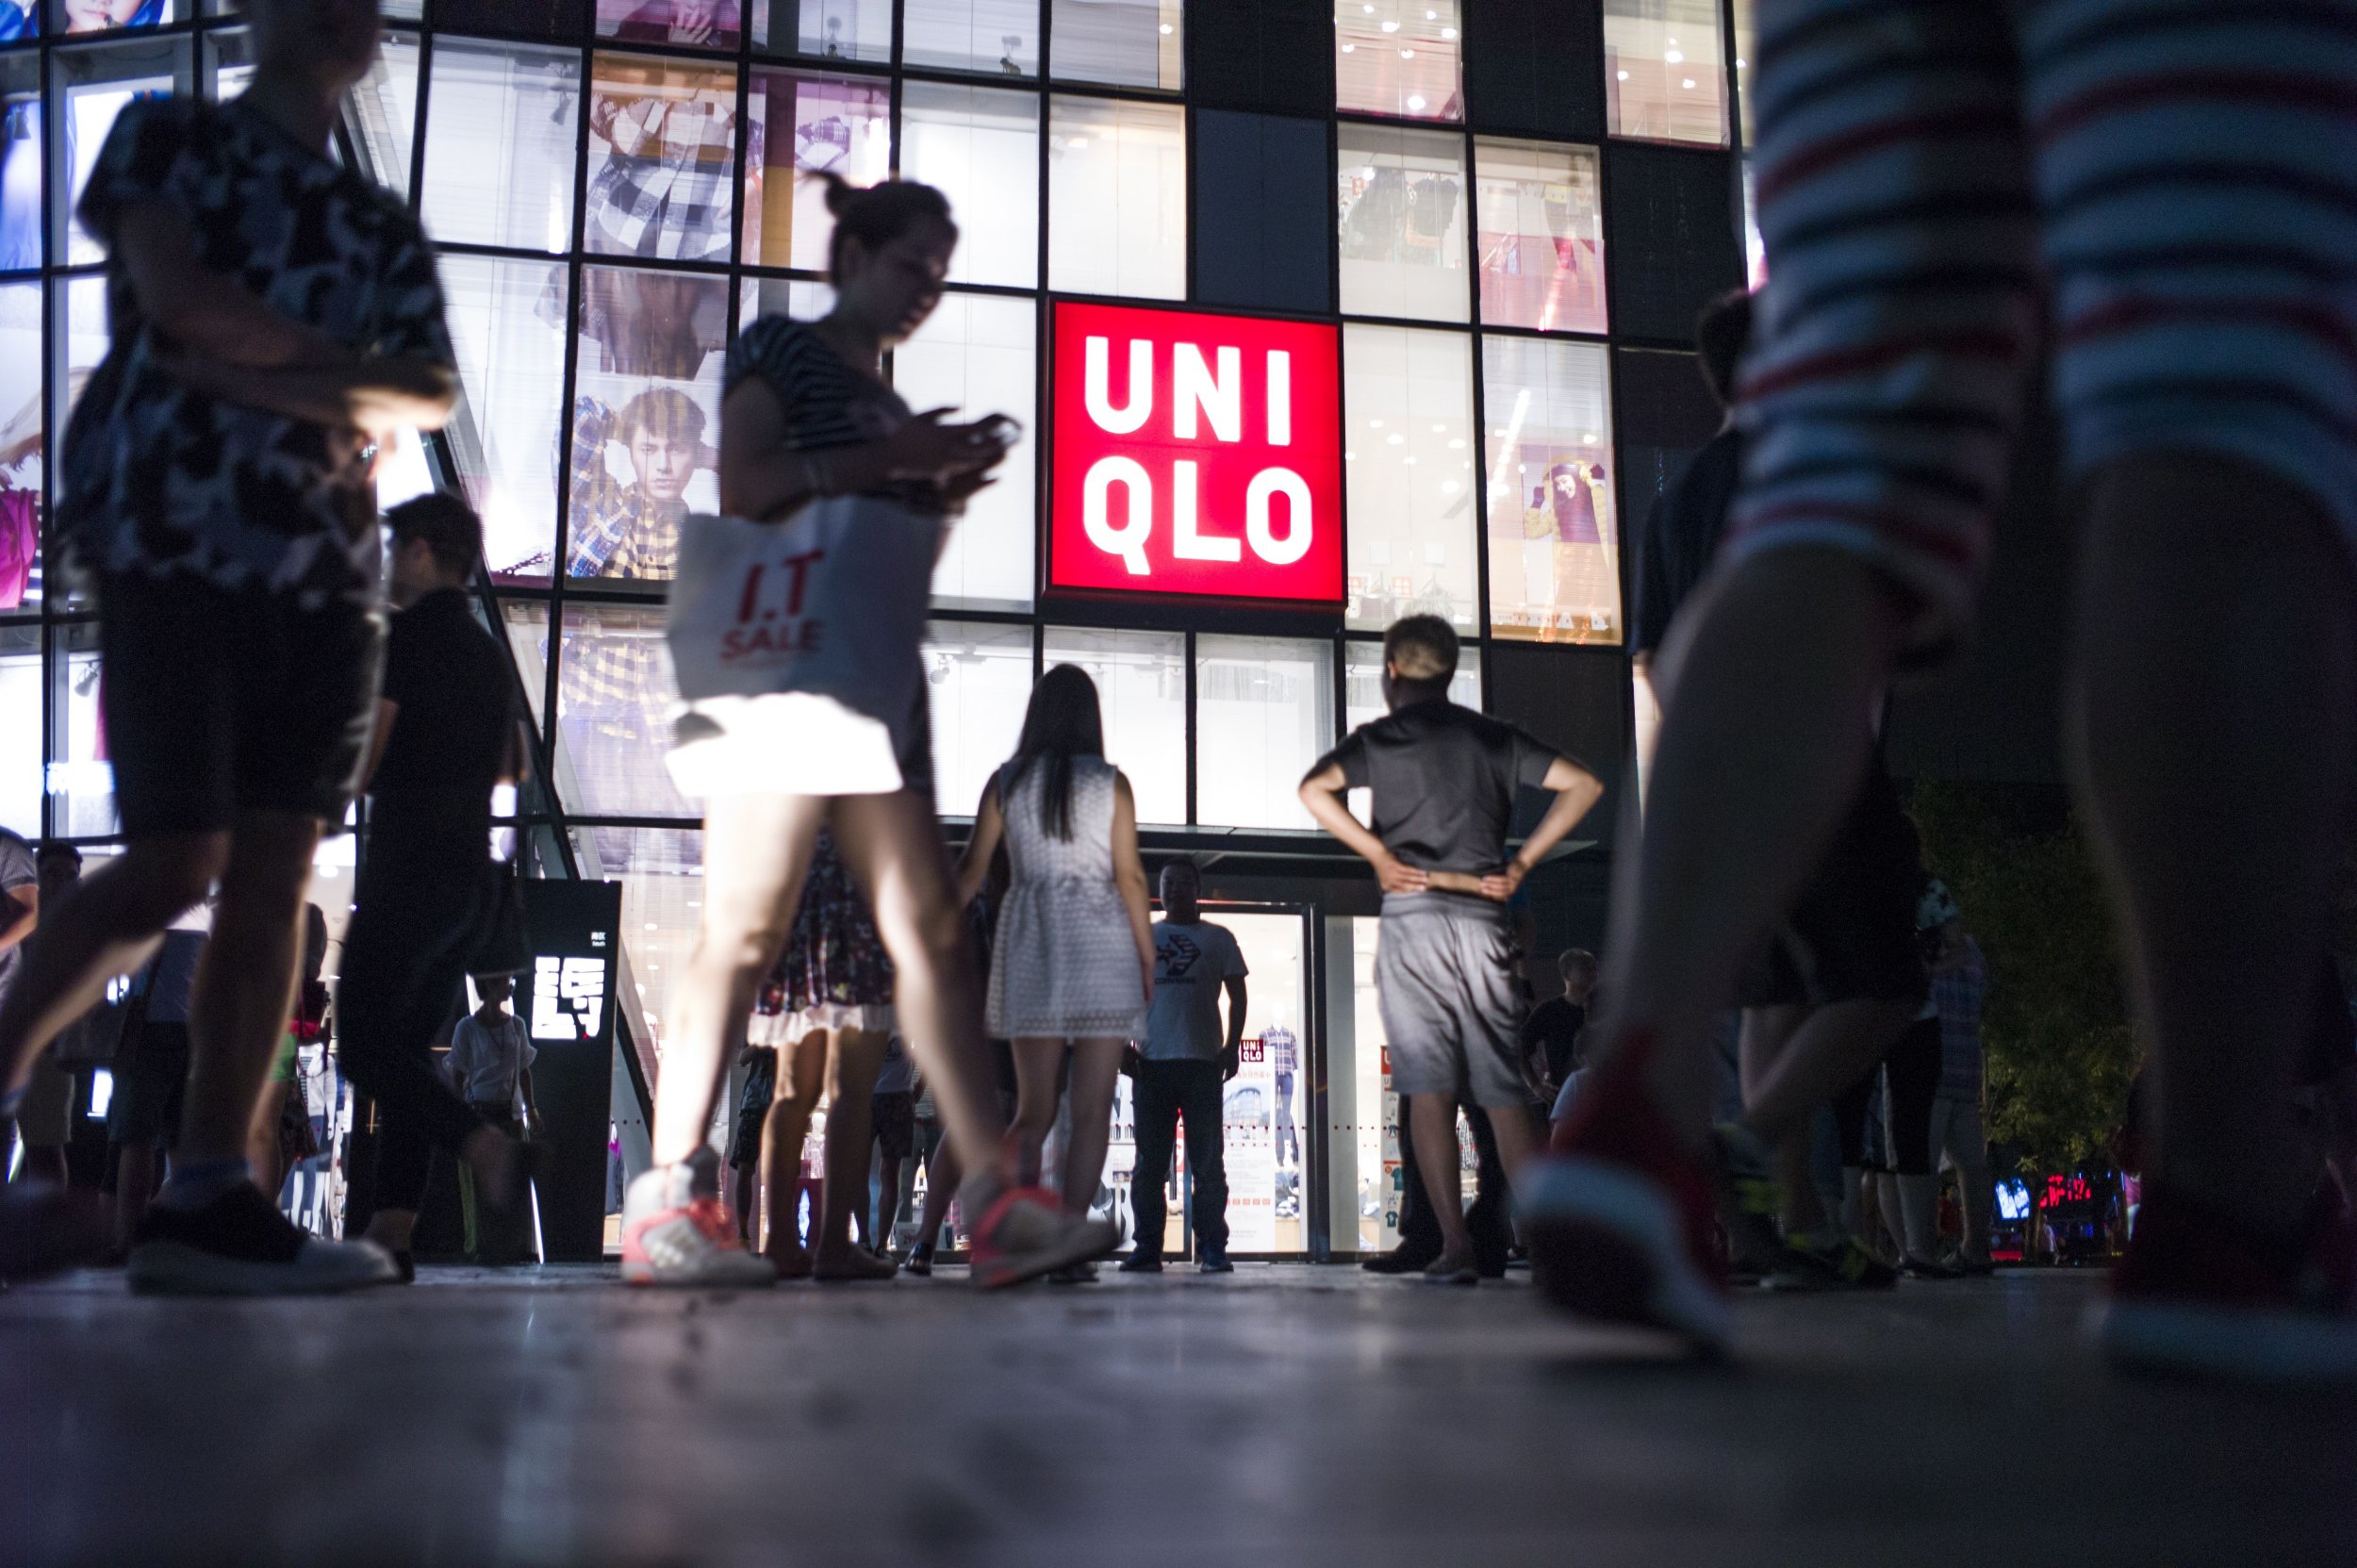 Uniqlo Store Sex Video Fallout China Orders Removal Of Amateur Porn From Social Media IBTimes picture